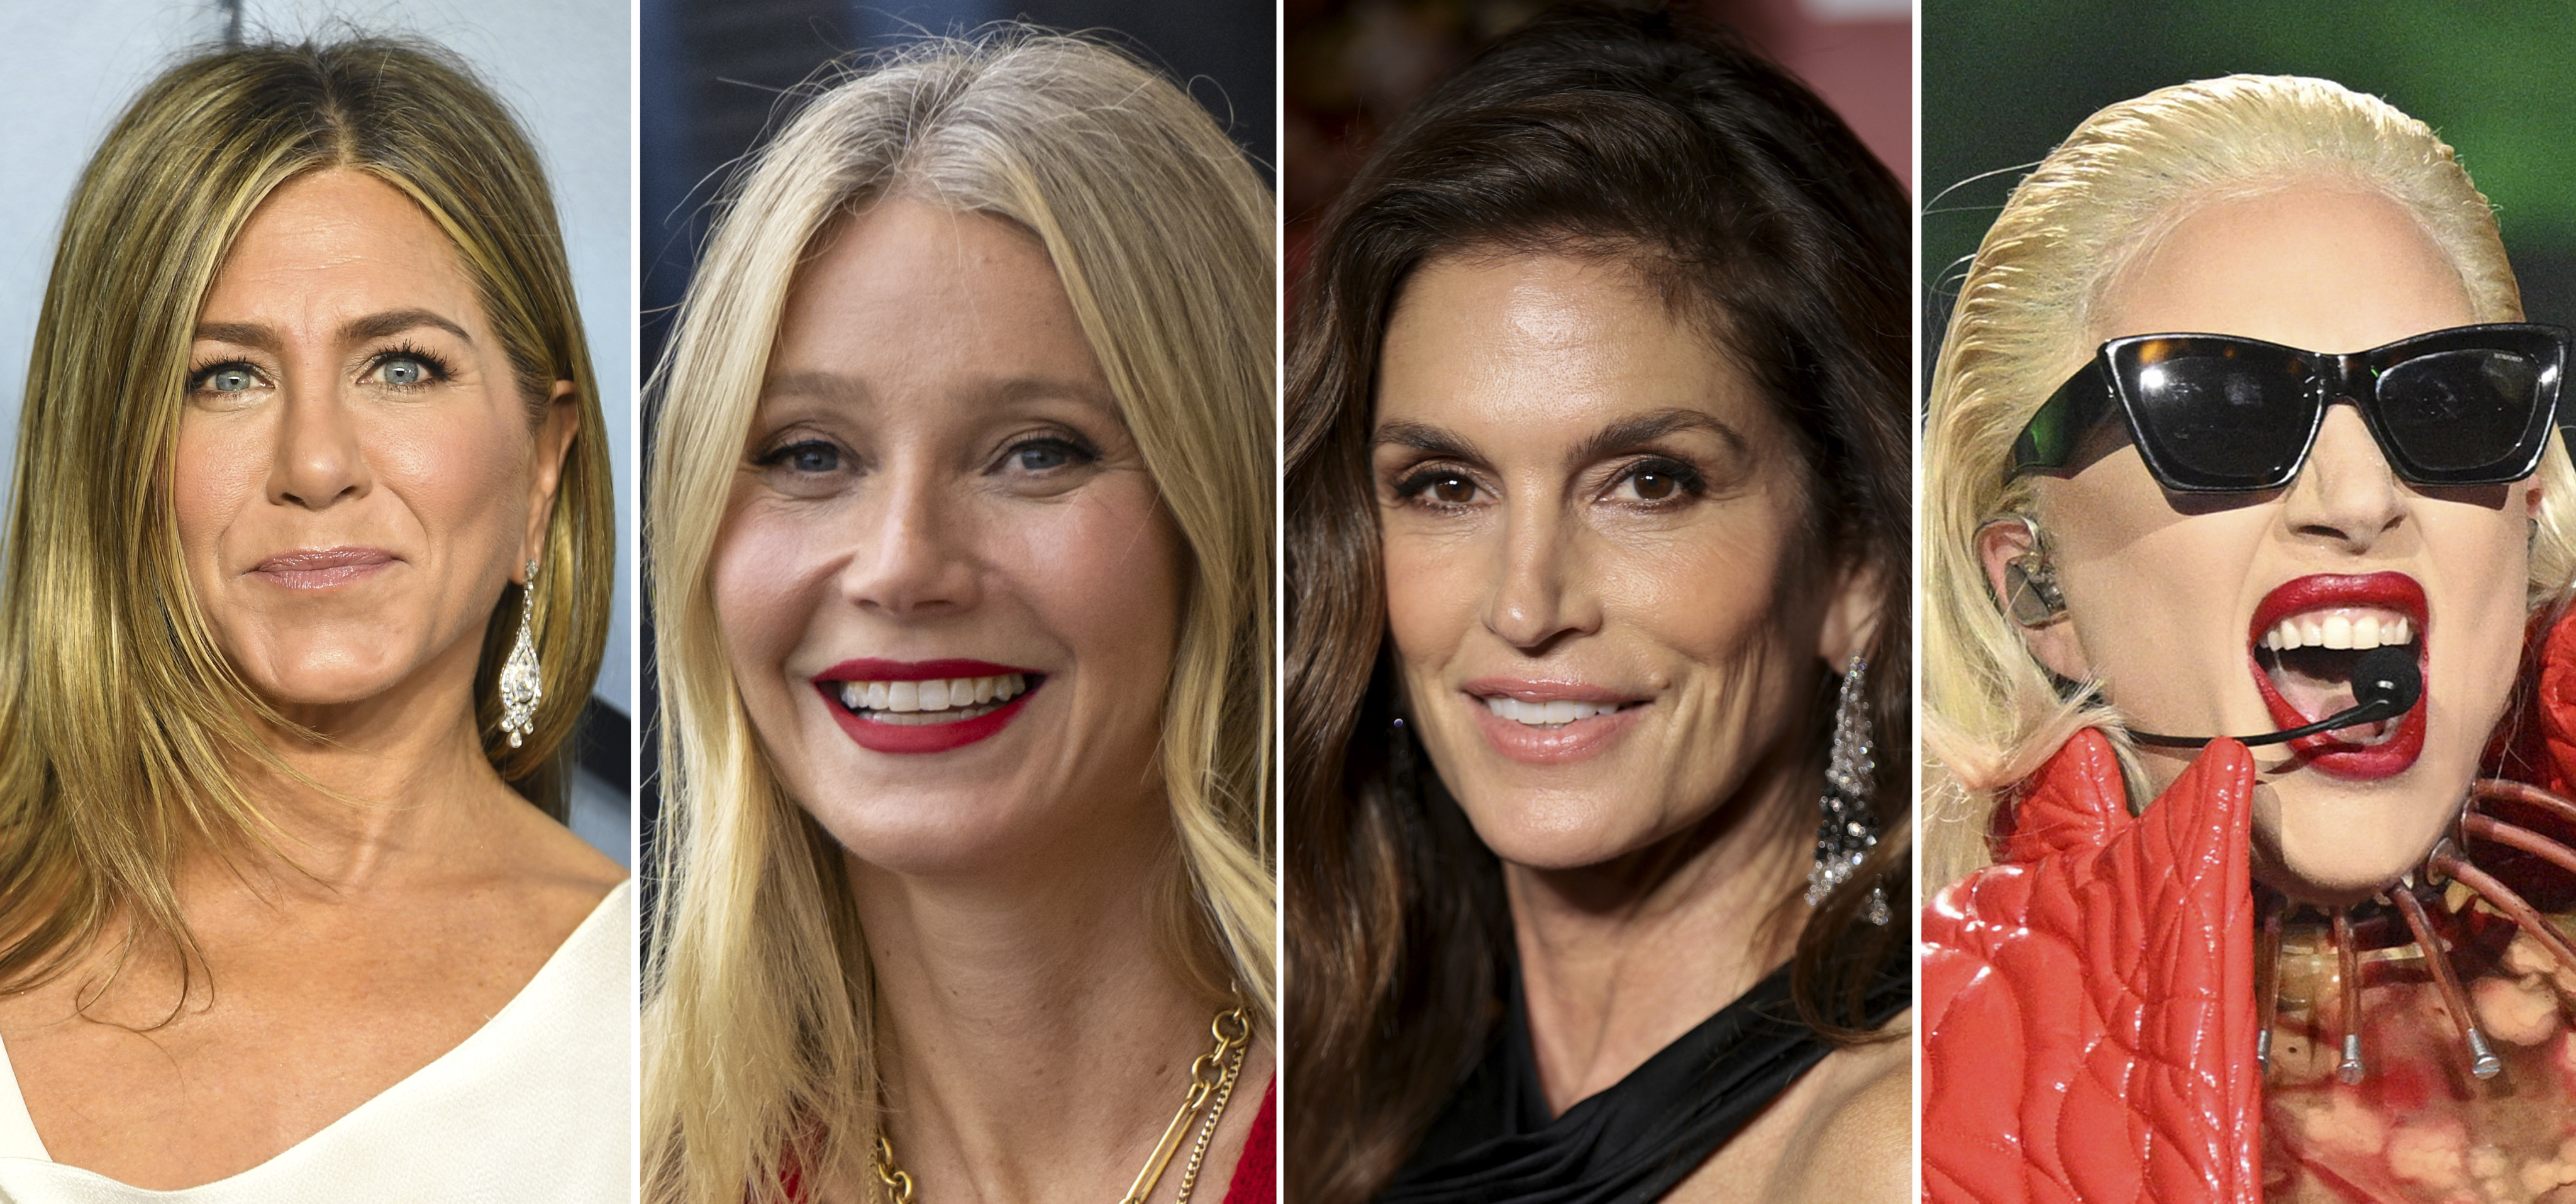 Gwyneth Paltrow, Cindy Crawford and Lady Gaga are among celebrities who swear by the benefits of infrared saunas. Photo: Getty Images